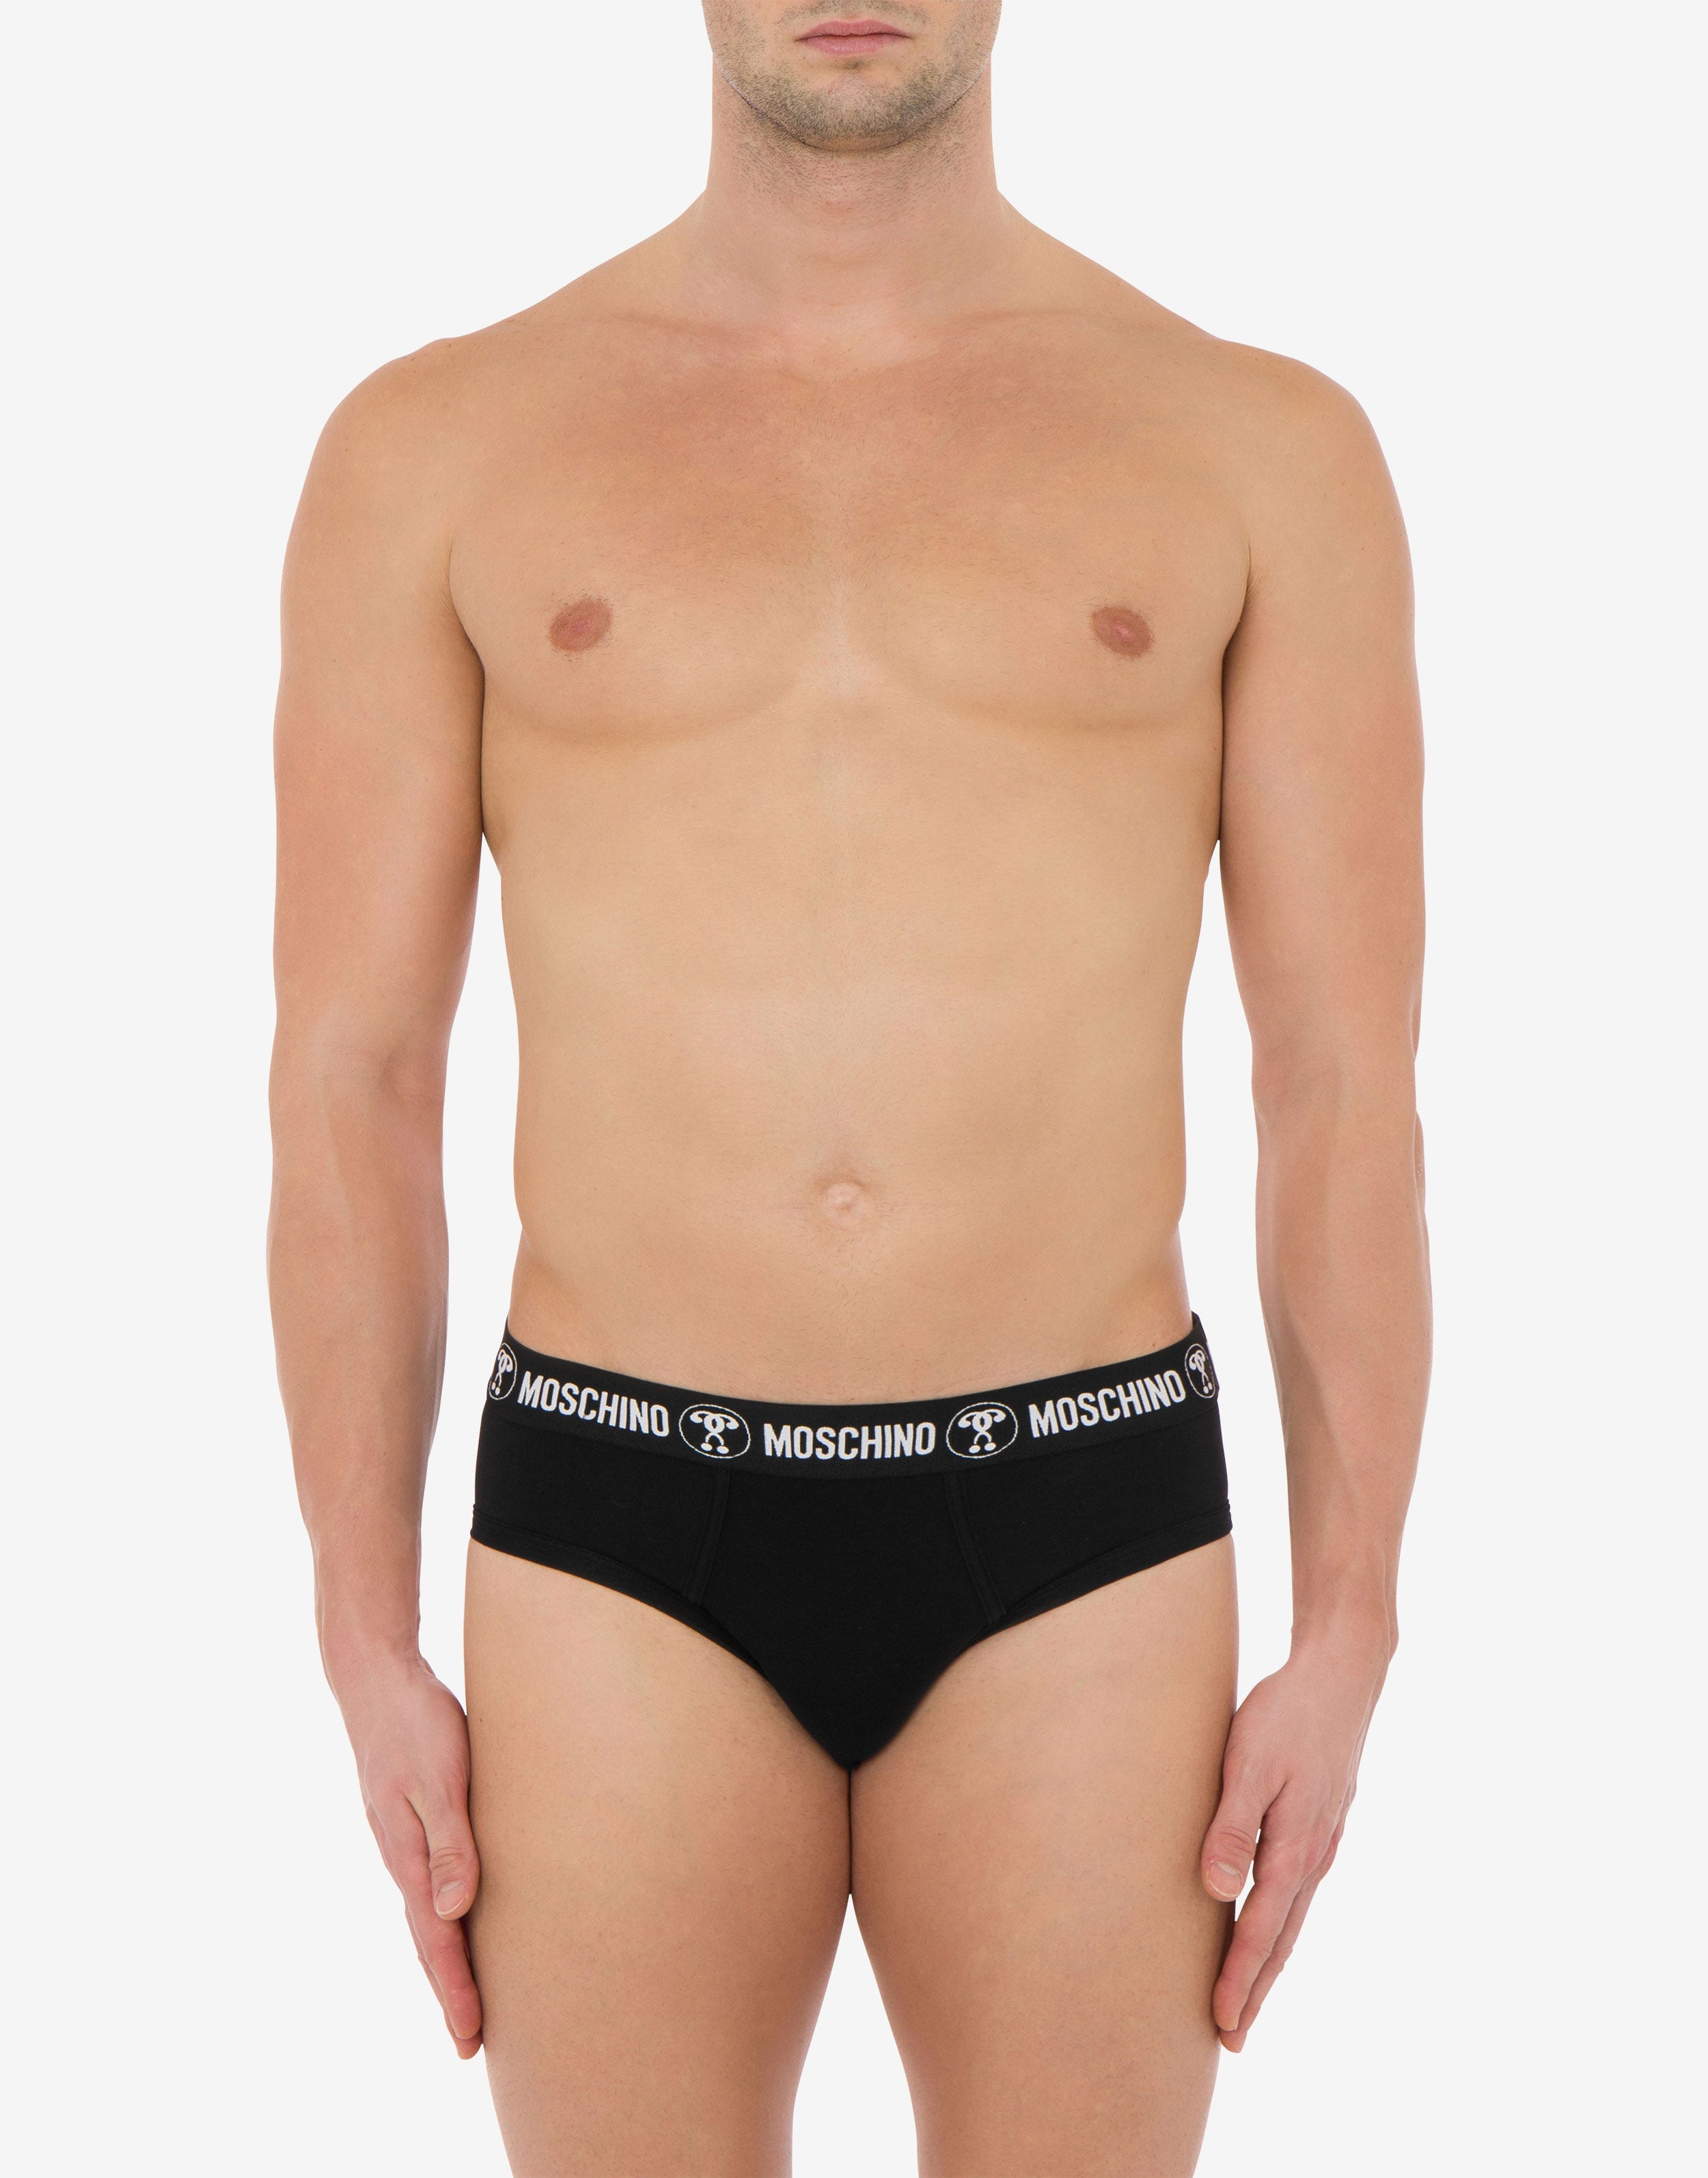 DOUBLE QUESTION MARK JERSEY BRIEFS - 2